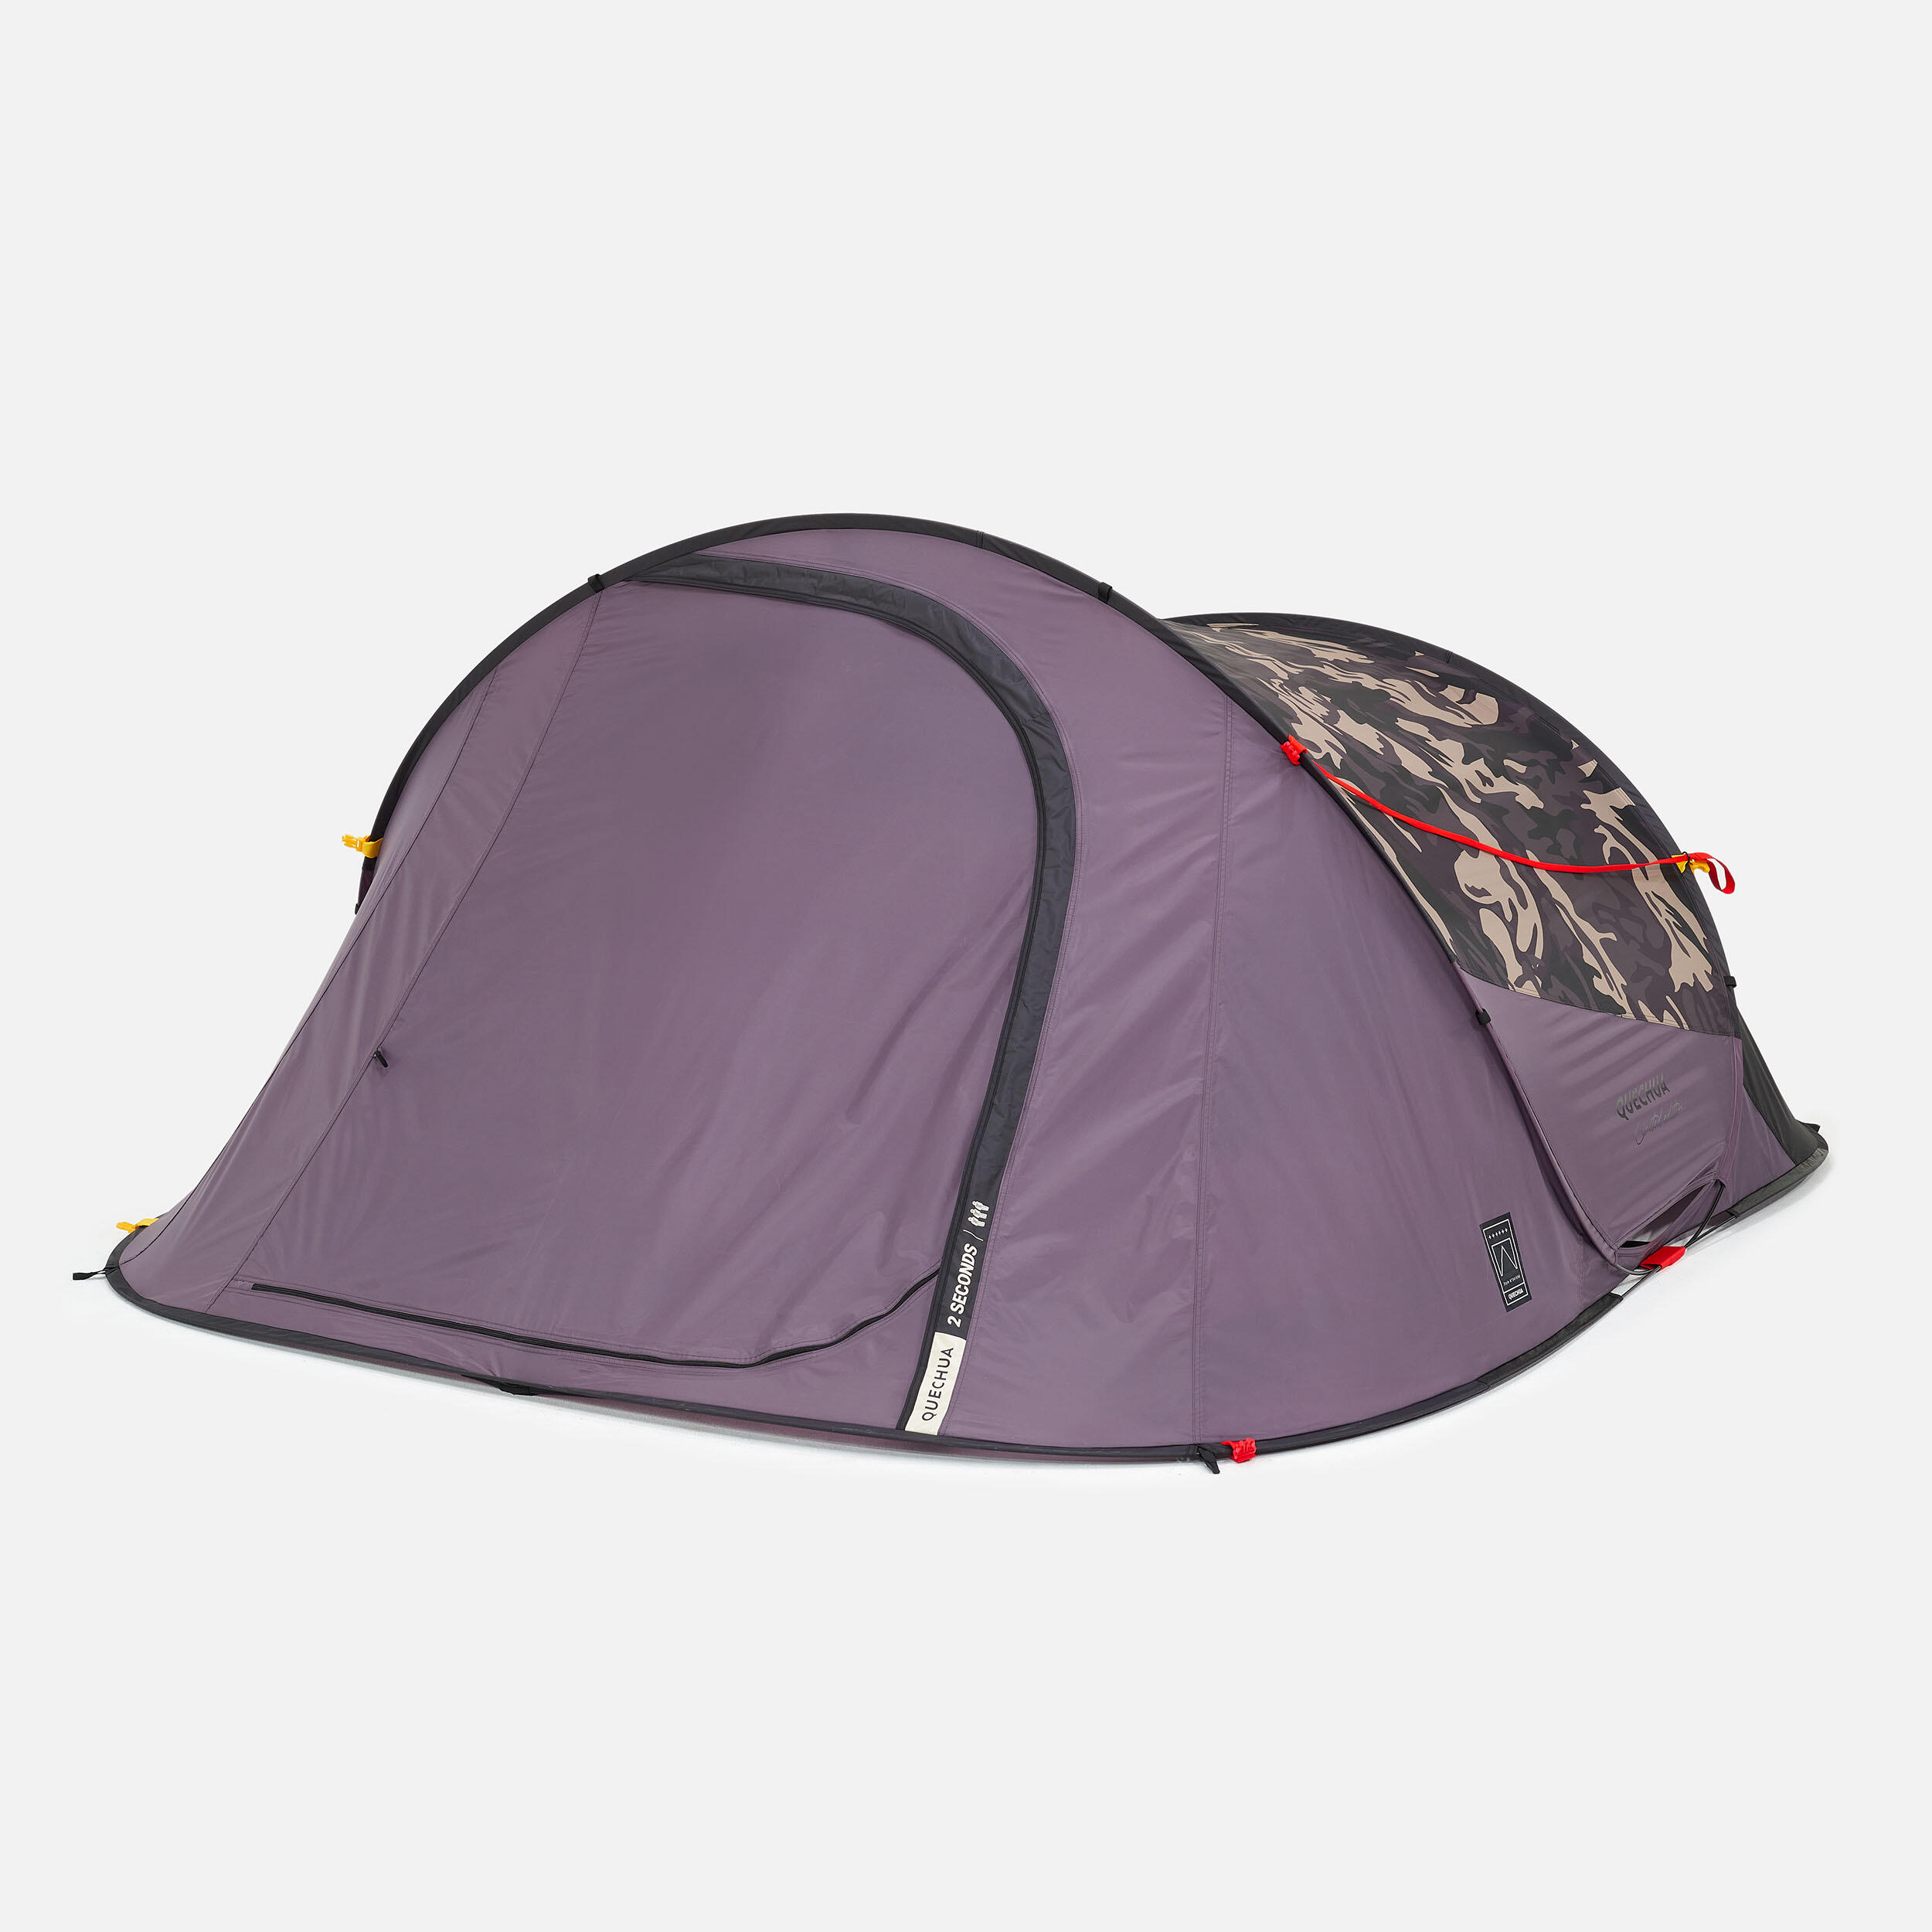 Camping tent - 2 SECONDS - 3-person 5/10